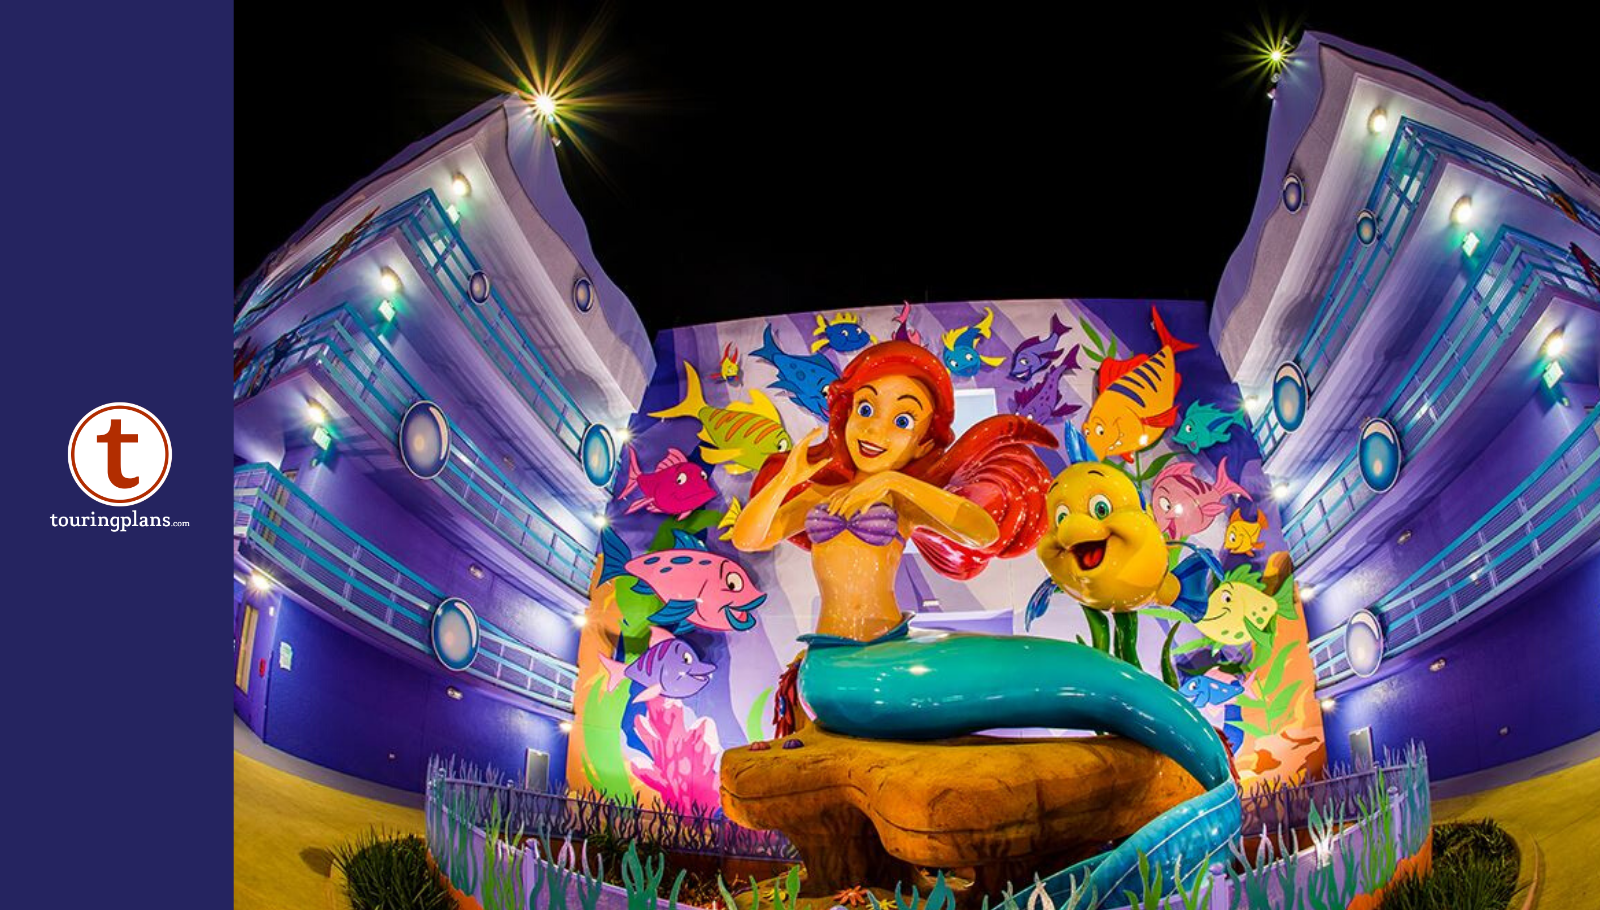 A Colorful Debut for Disney's Art of Animation Resort